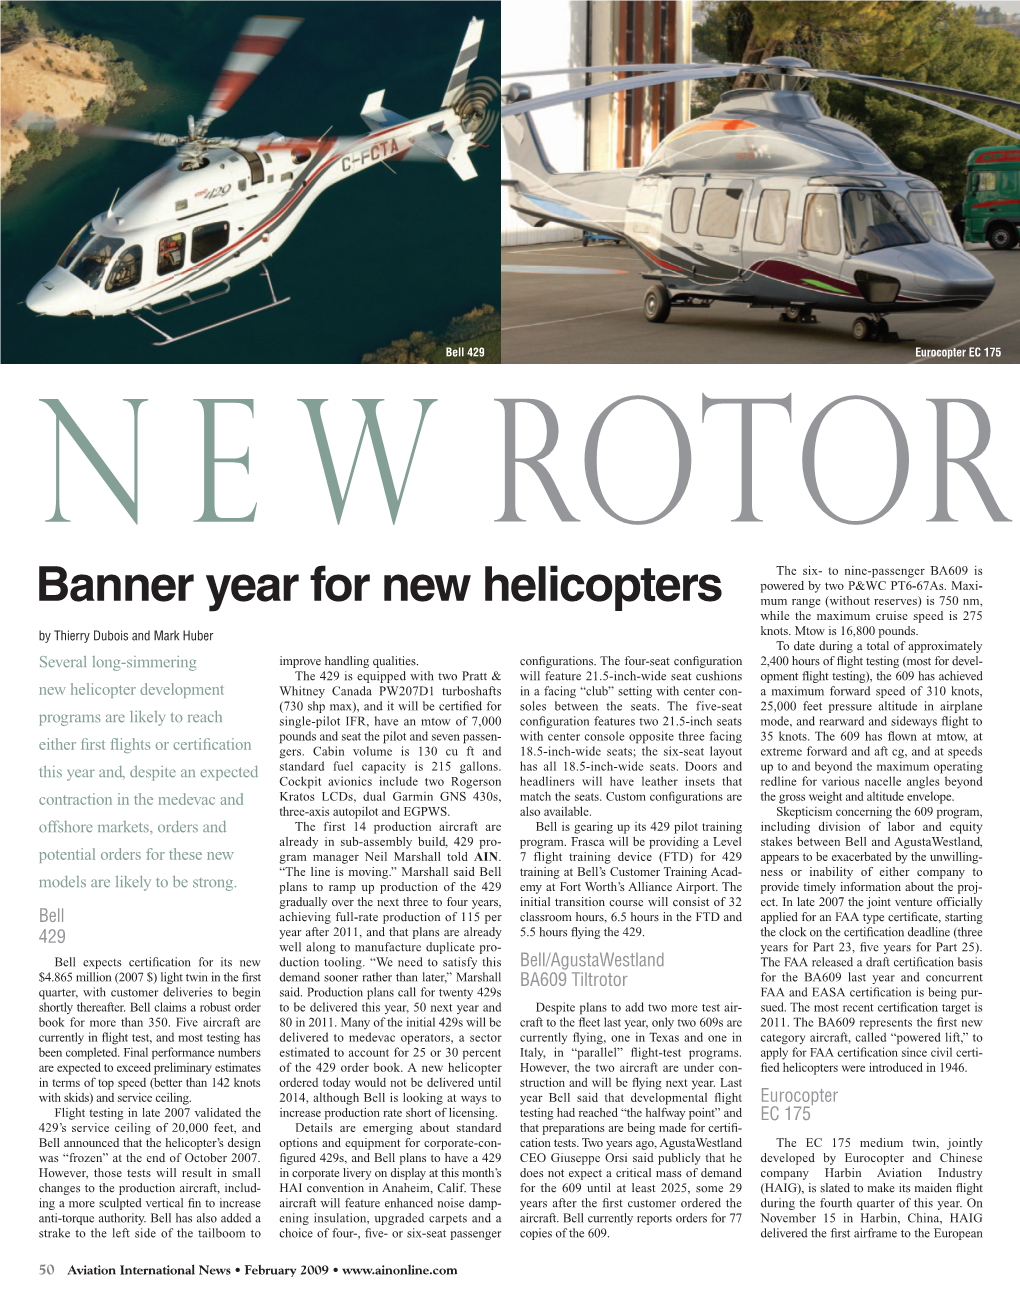 Banner Year for New Helicopters Mum Range (Without Reserves) Is 750 Nm, While the Maximum Cruise Speed Is 275 by Thierry Dubois and Mark Huber Knots